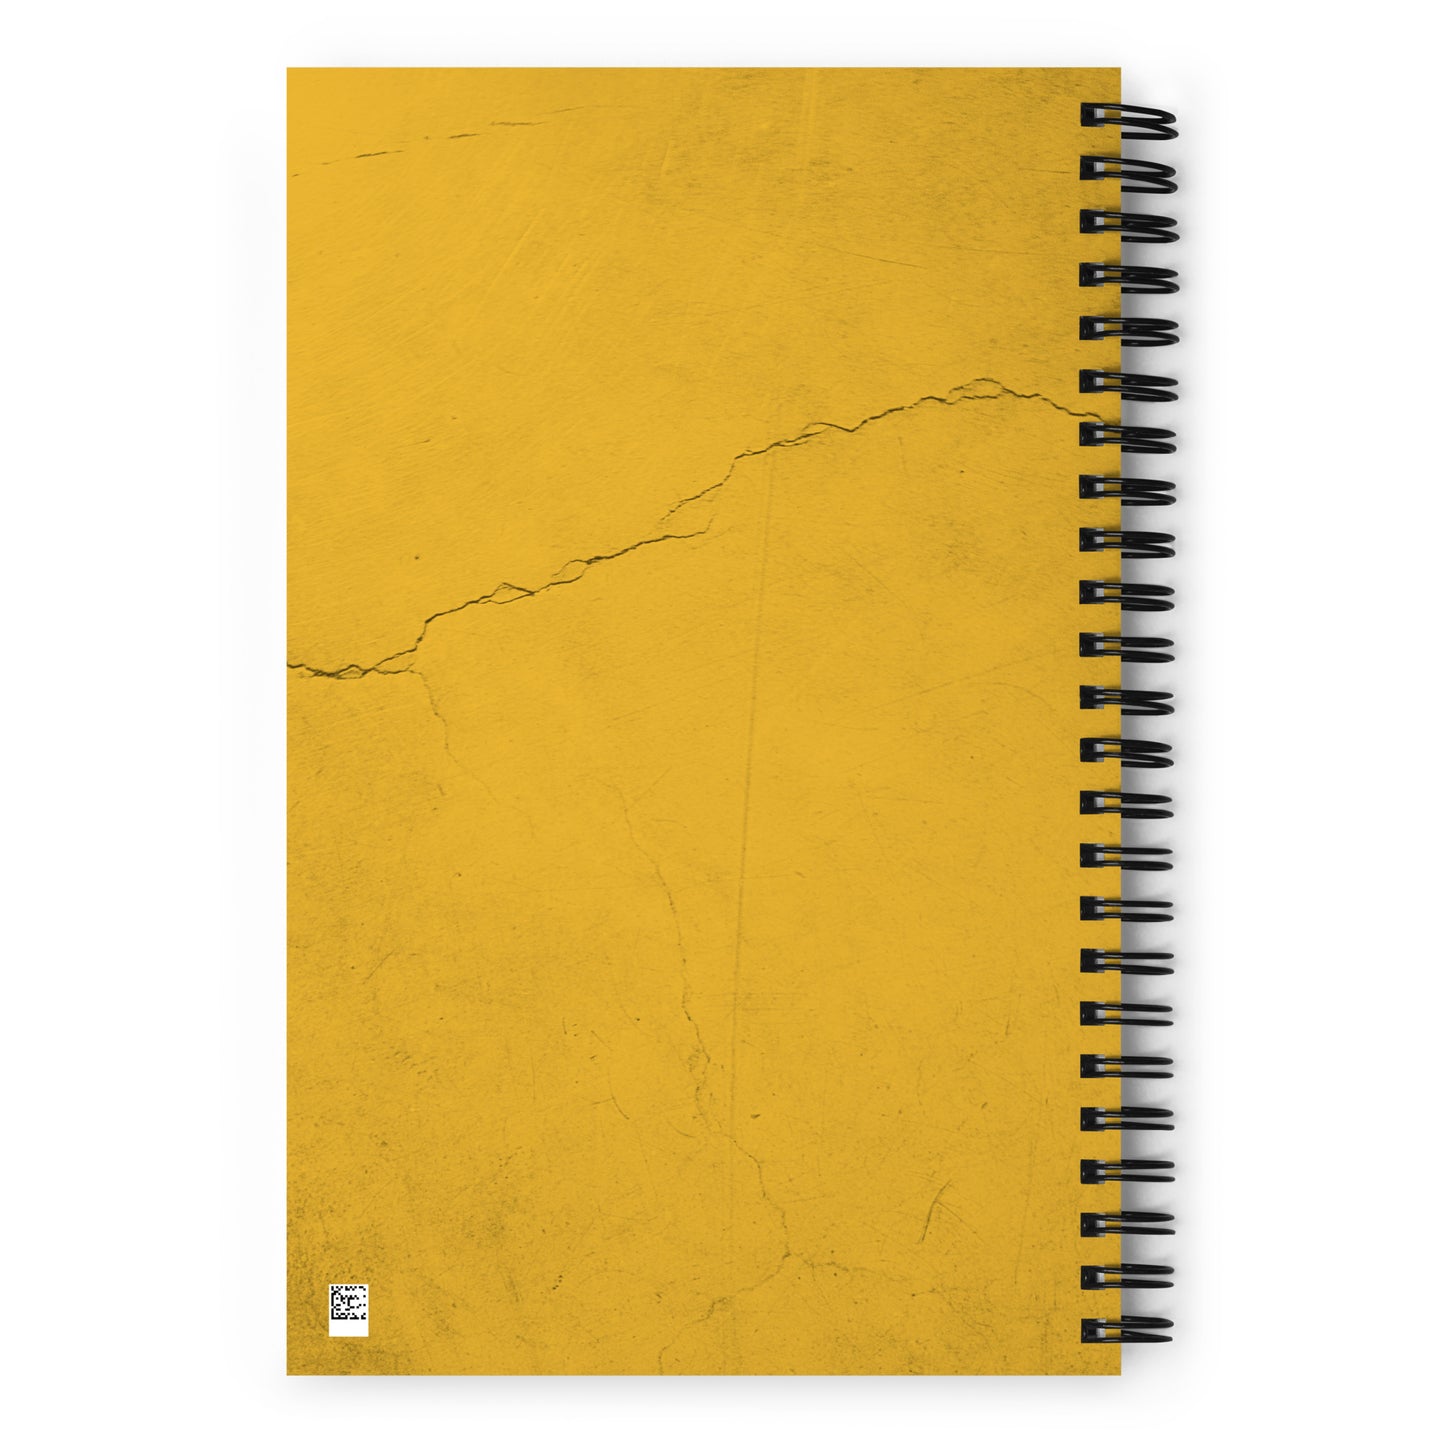 Resilient & Unapologetic Spiral notebook